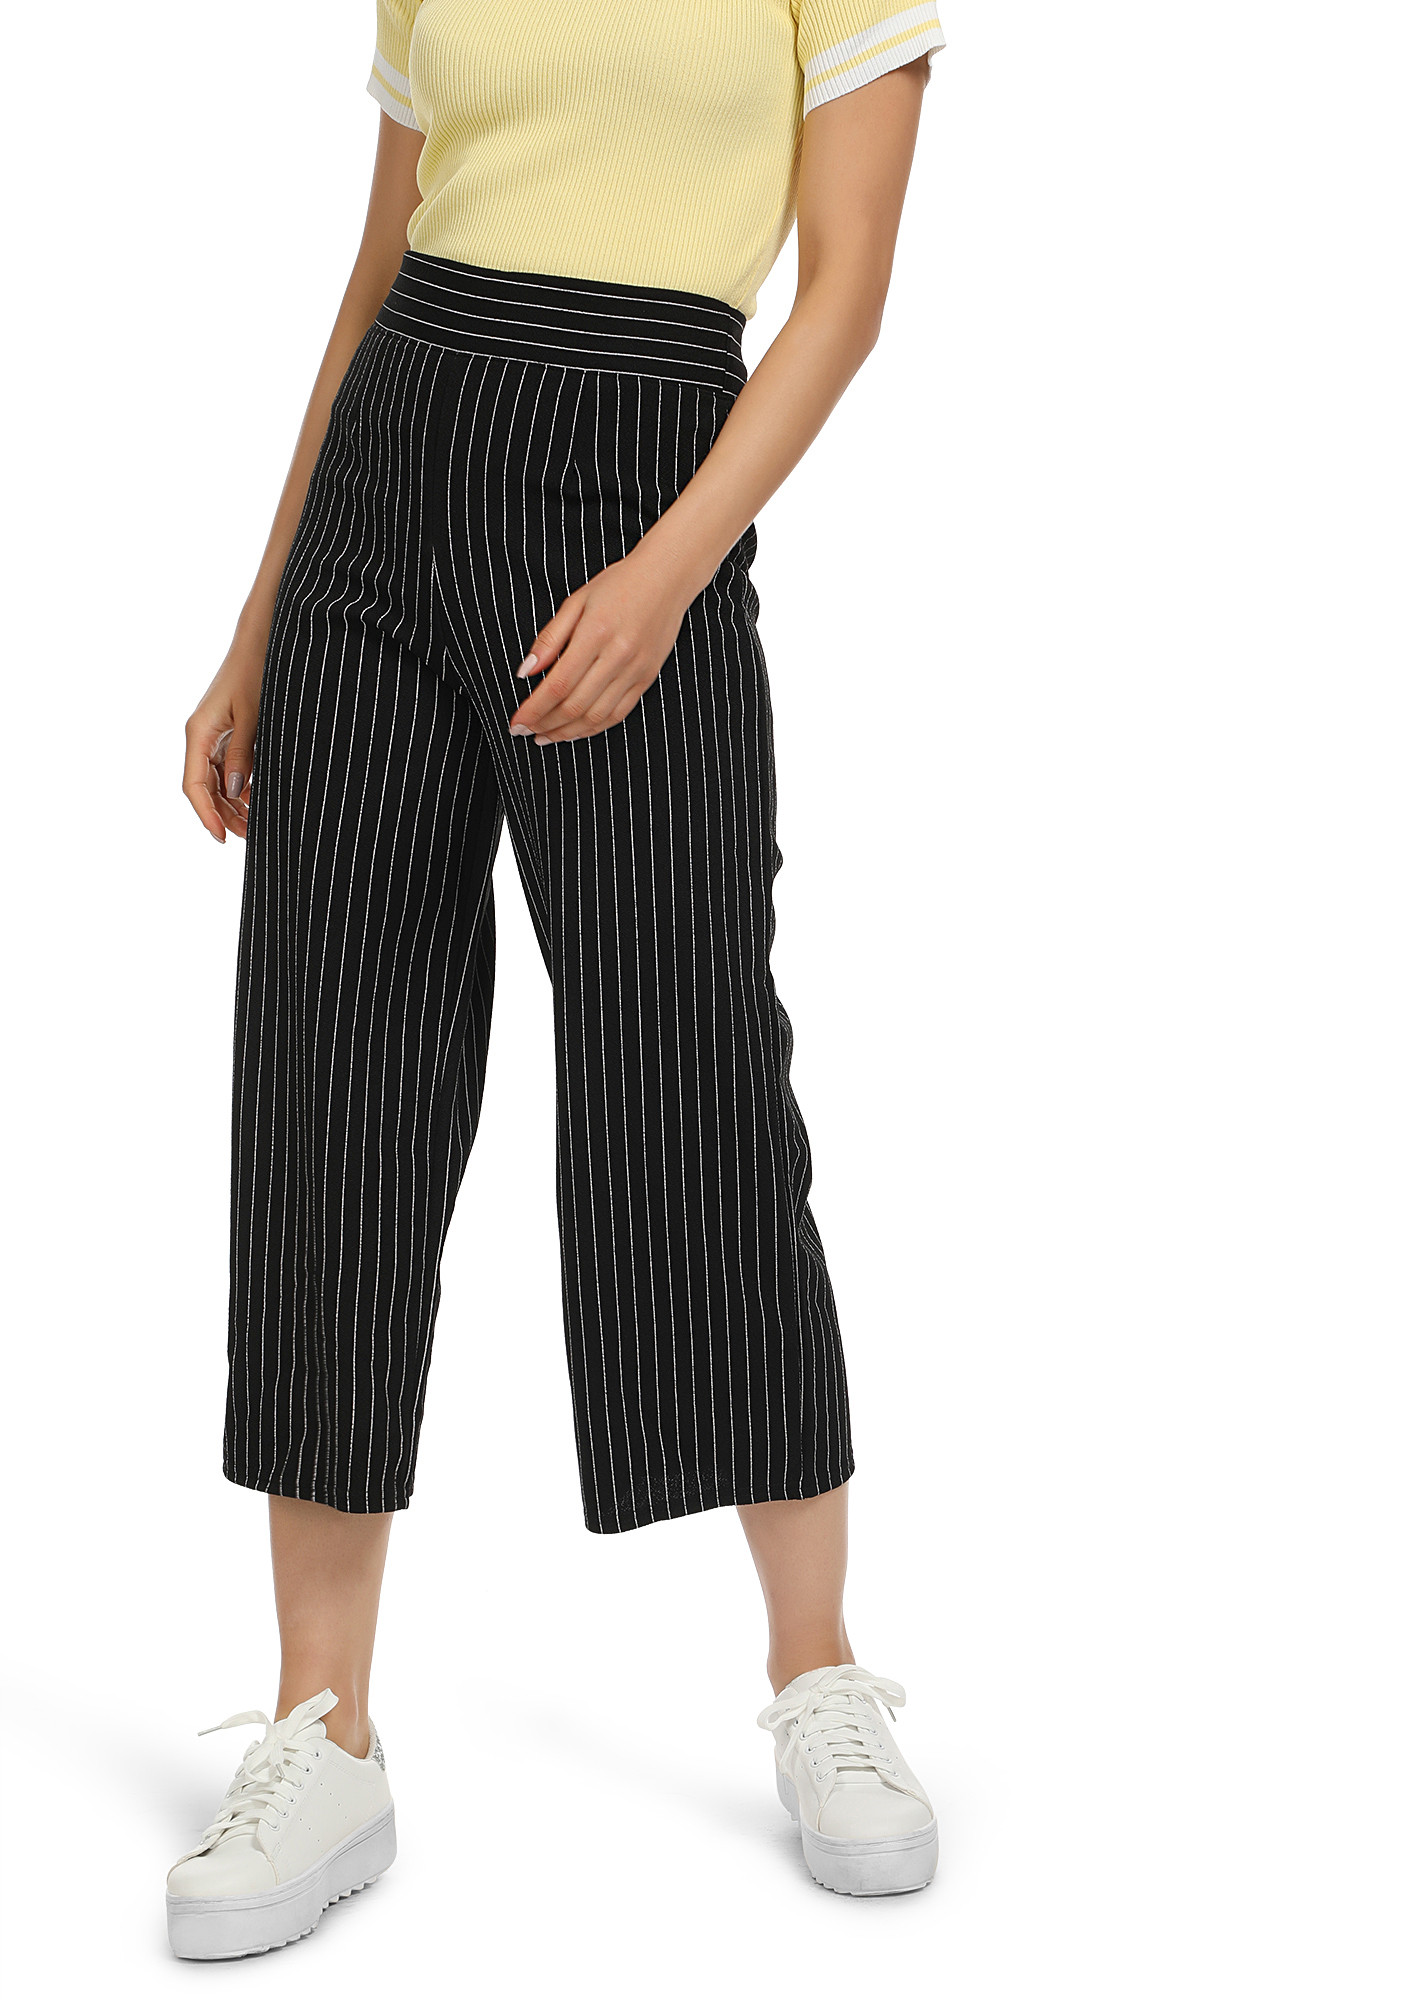 LIVING ON A THIN LINE BLACK CULOTTES